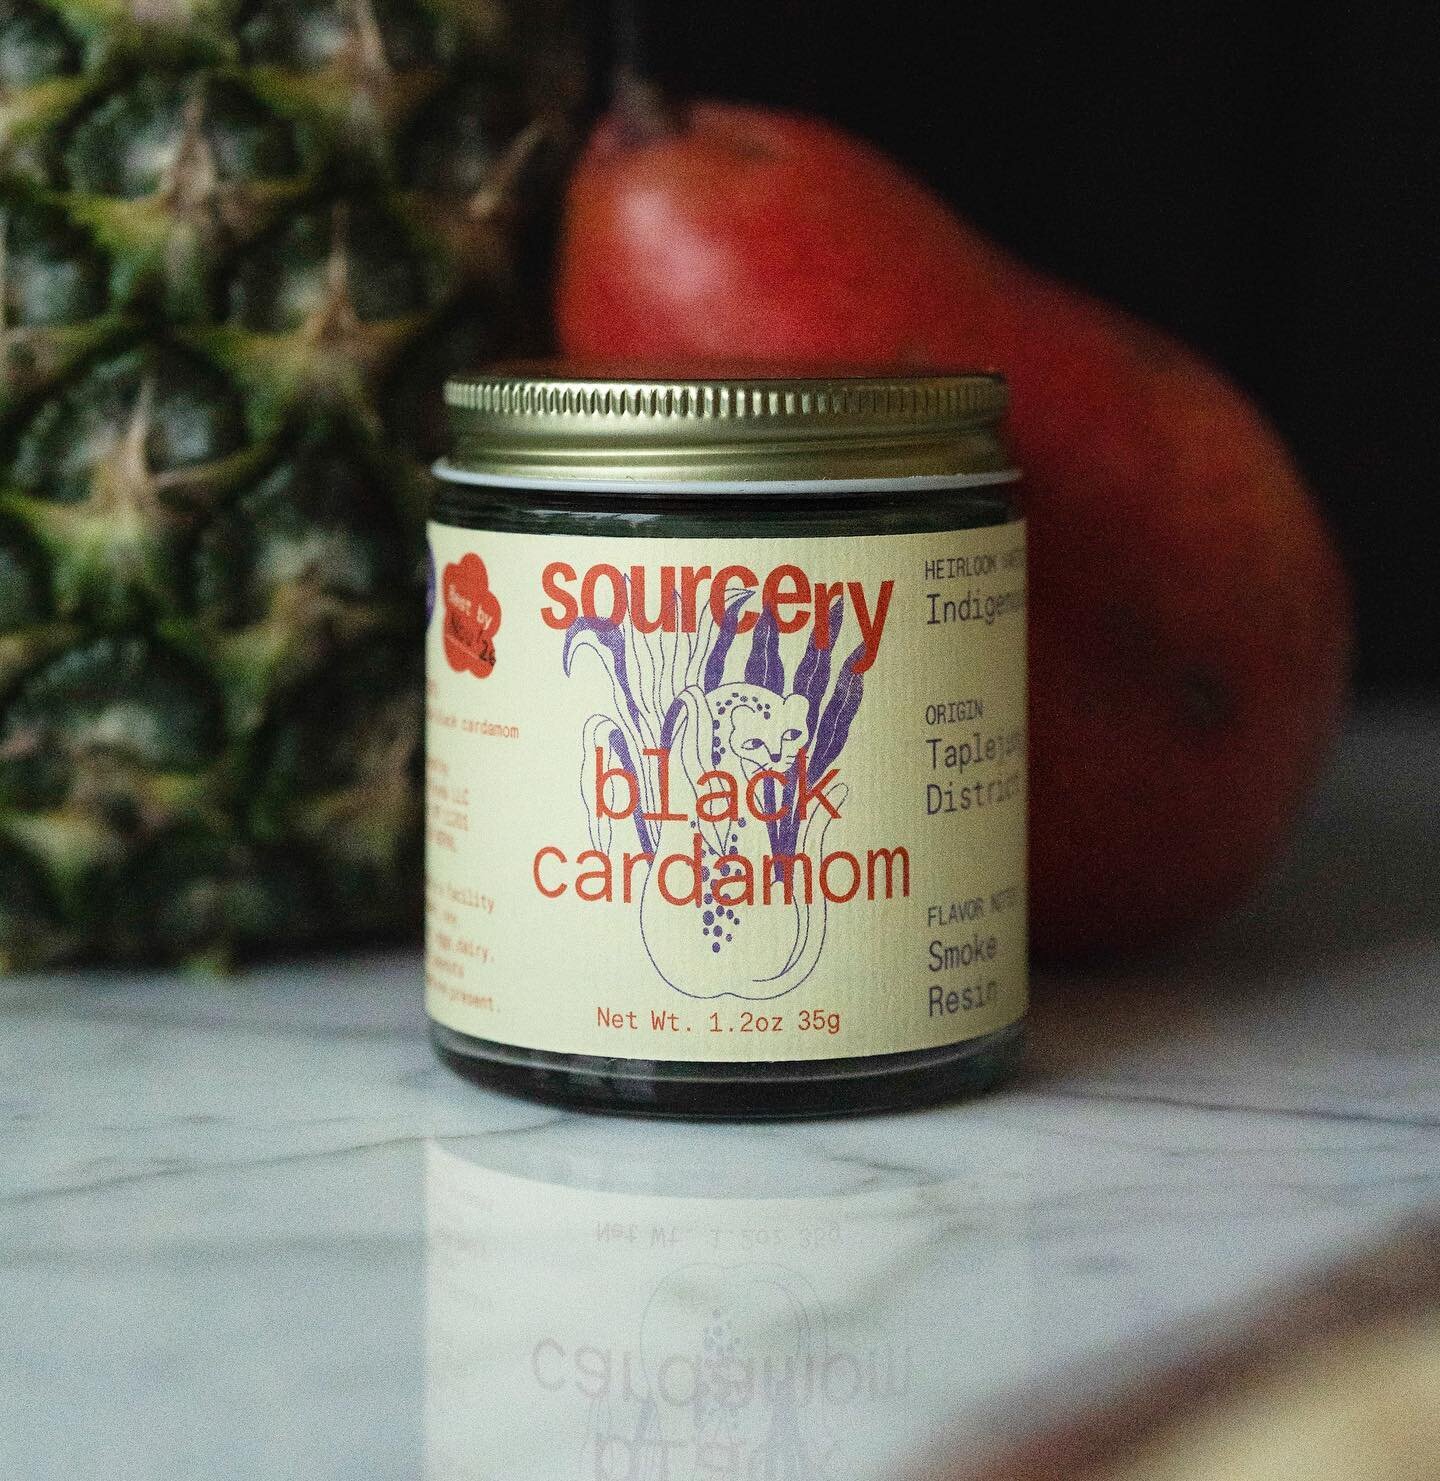 Heirloom Black Cardamom

It&rsquo;s smoky with flavors of camphor and resin, It&rsquo;s one of my favorite spices to play with 🪄

🥘 Black cardamom is used in cooking meats, stews and beans. 
🍸 in cocktails and bitters 
🍦 it plays nice with other 